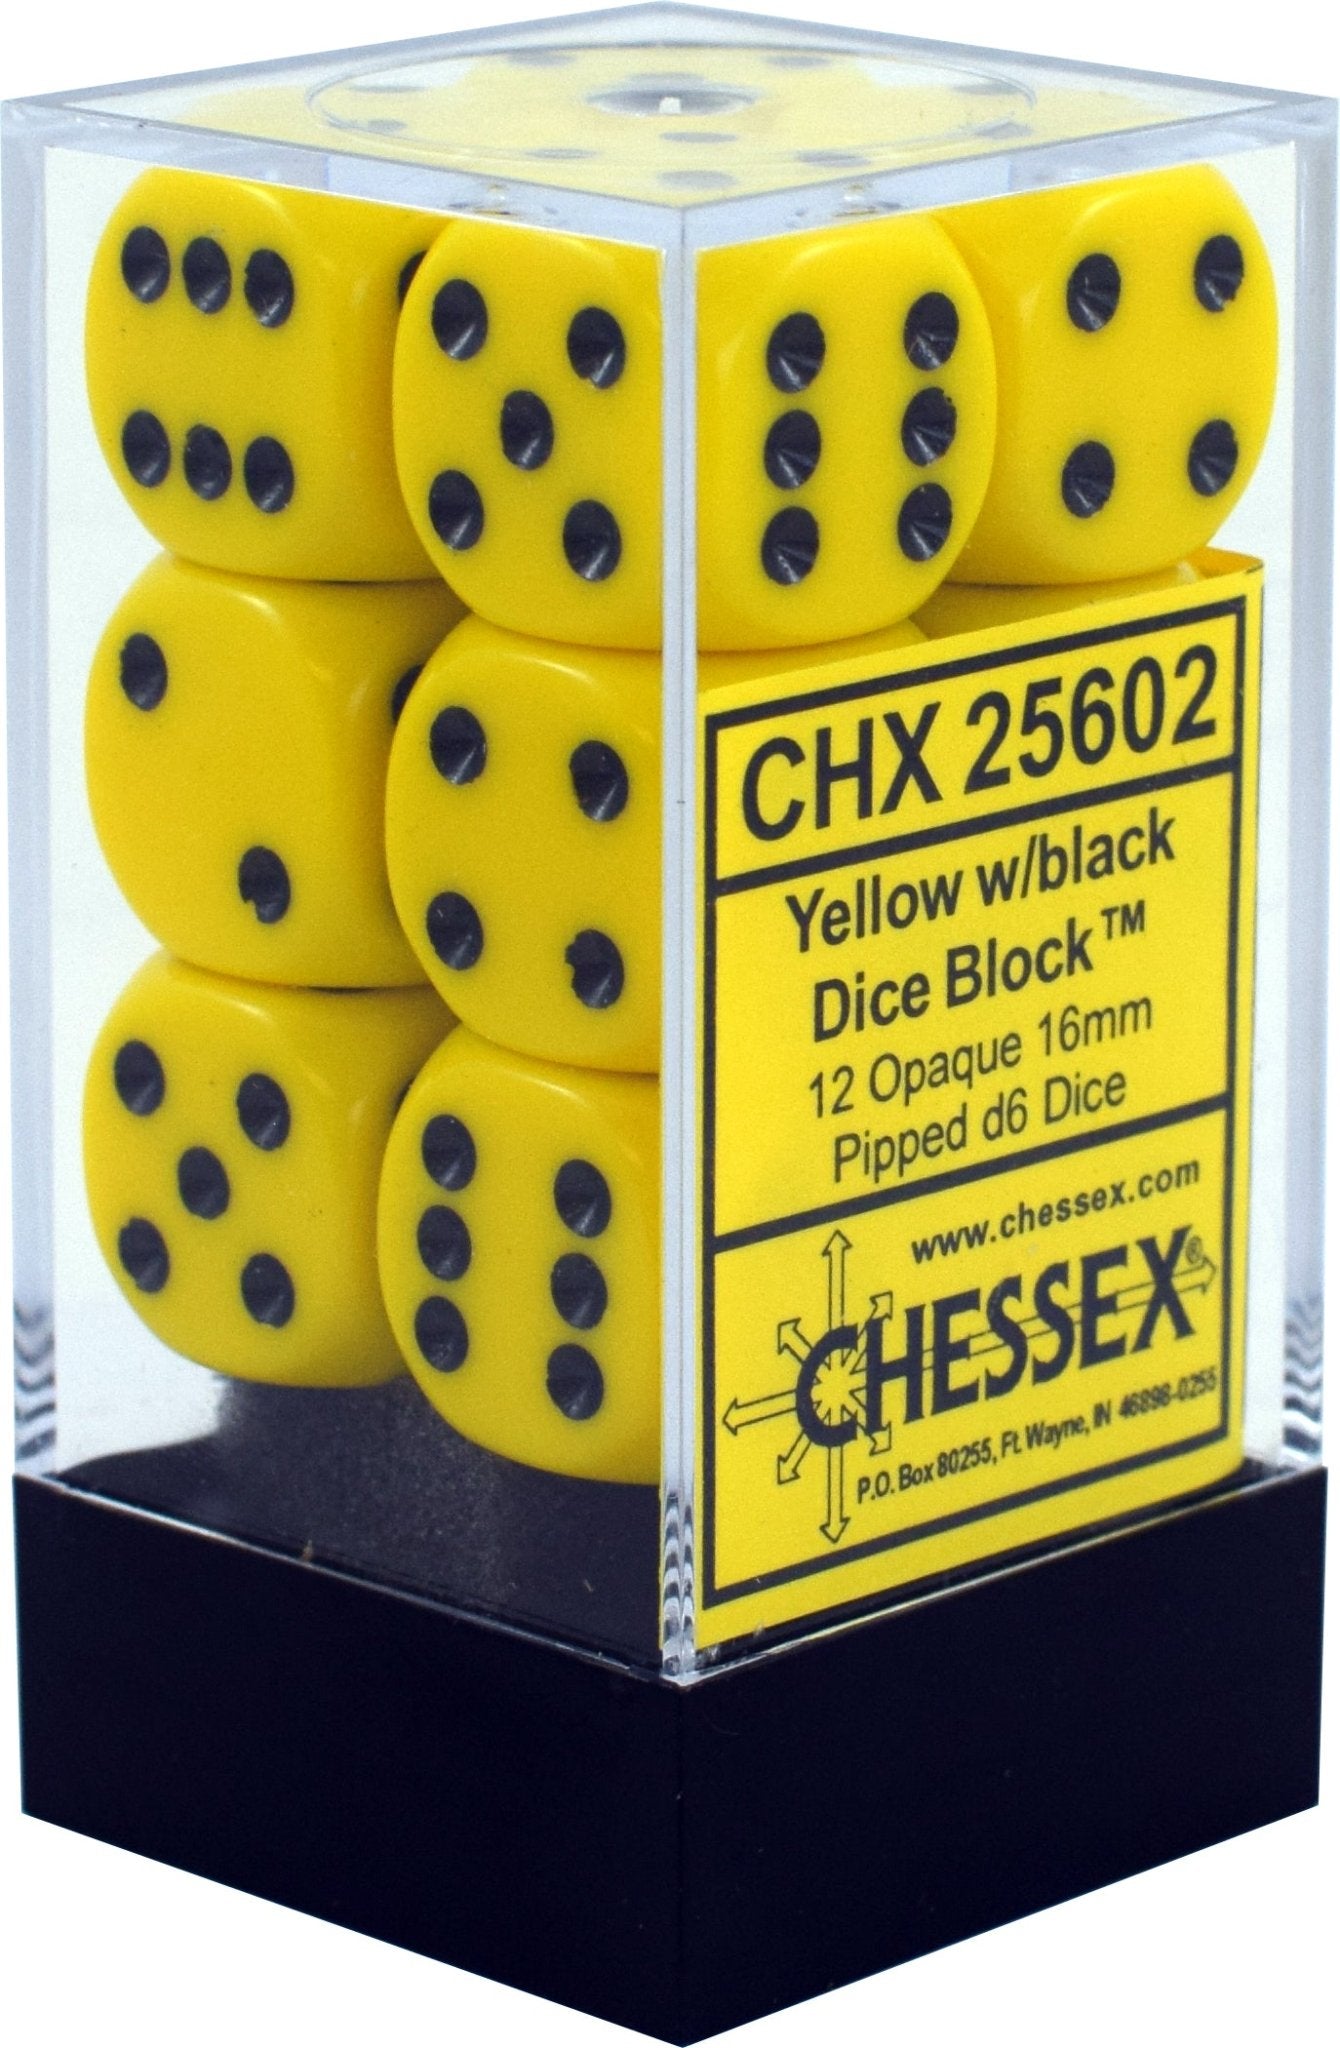 Chessex Dice: D6 Block 16mm - Opaque - Yellow with Black (CHX 25602) - Gamescape